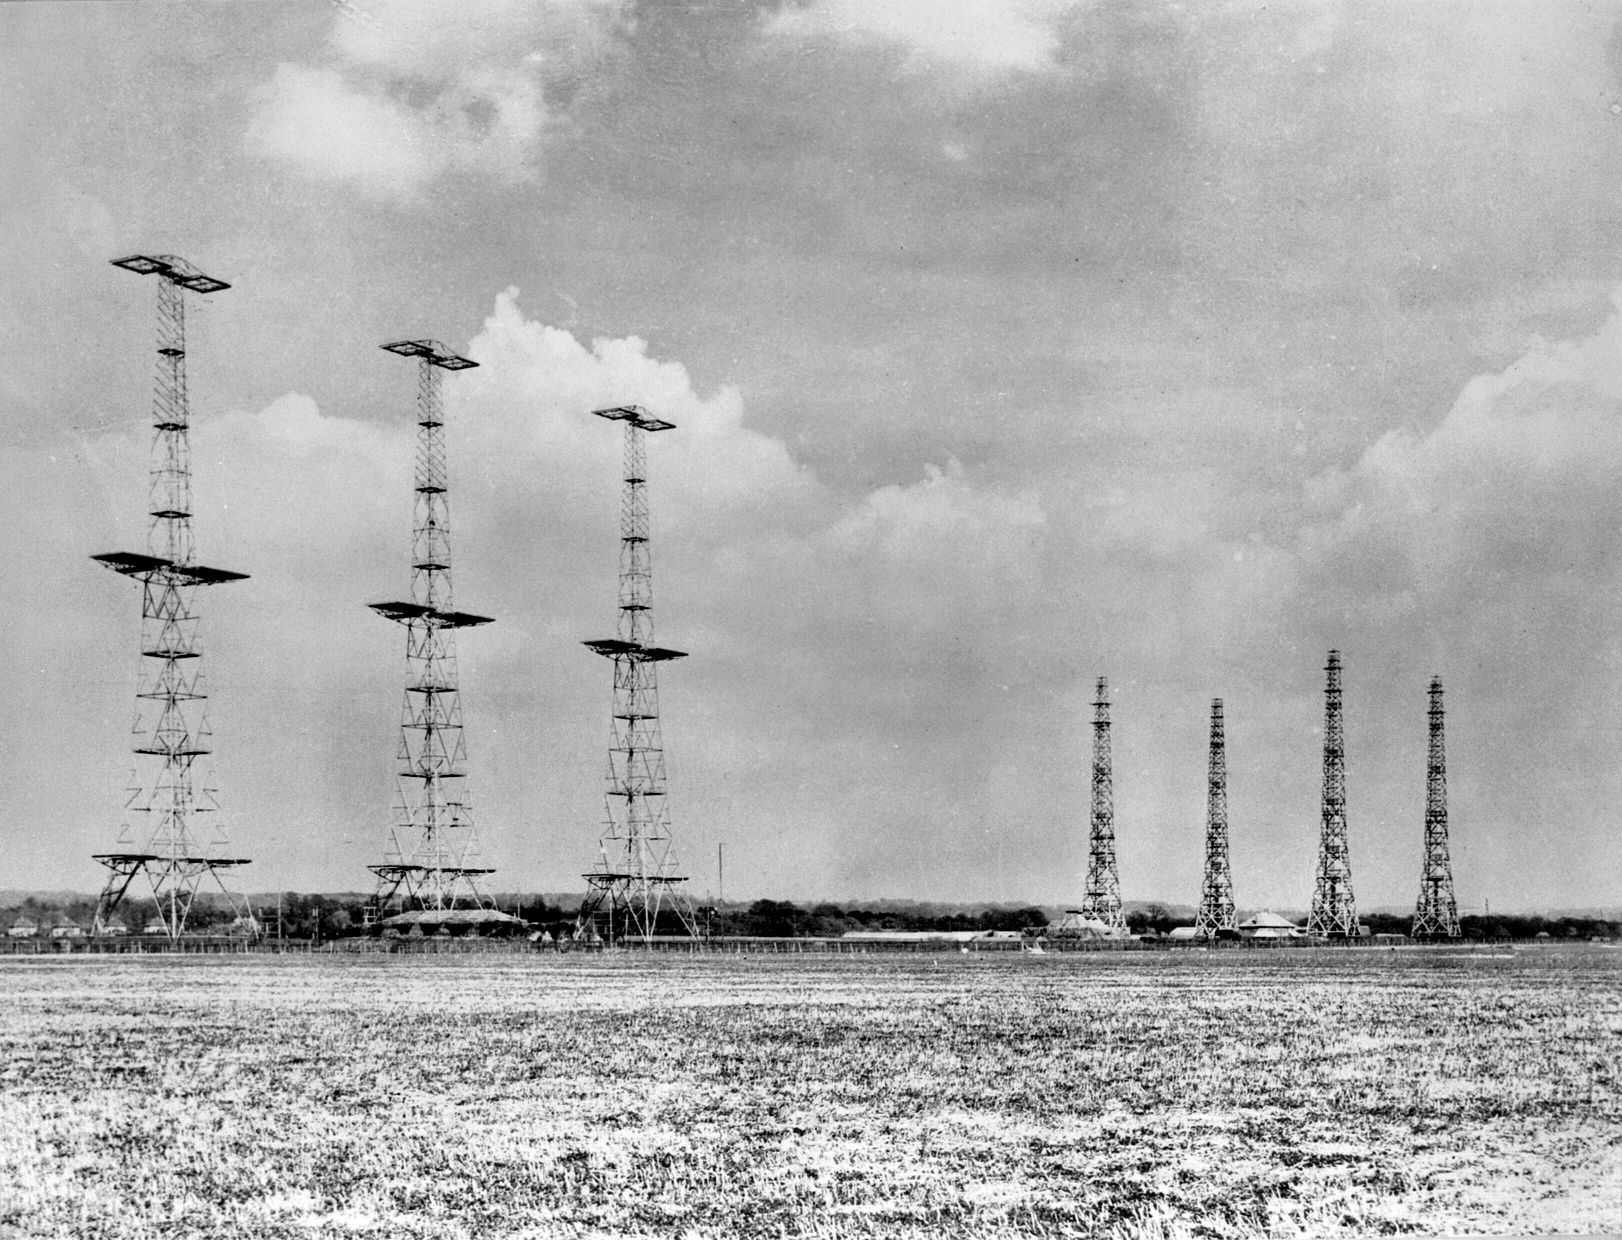 These radar masts located at RAF Poling, Bawdsey Manor, Suffolk, along the coastline of Great Britain, could detect the presence of German bomber formations assembling for raids some 200 miles away.